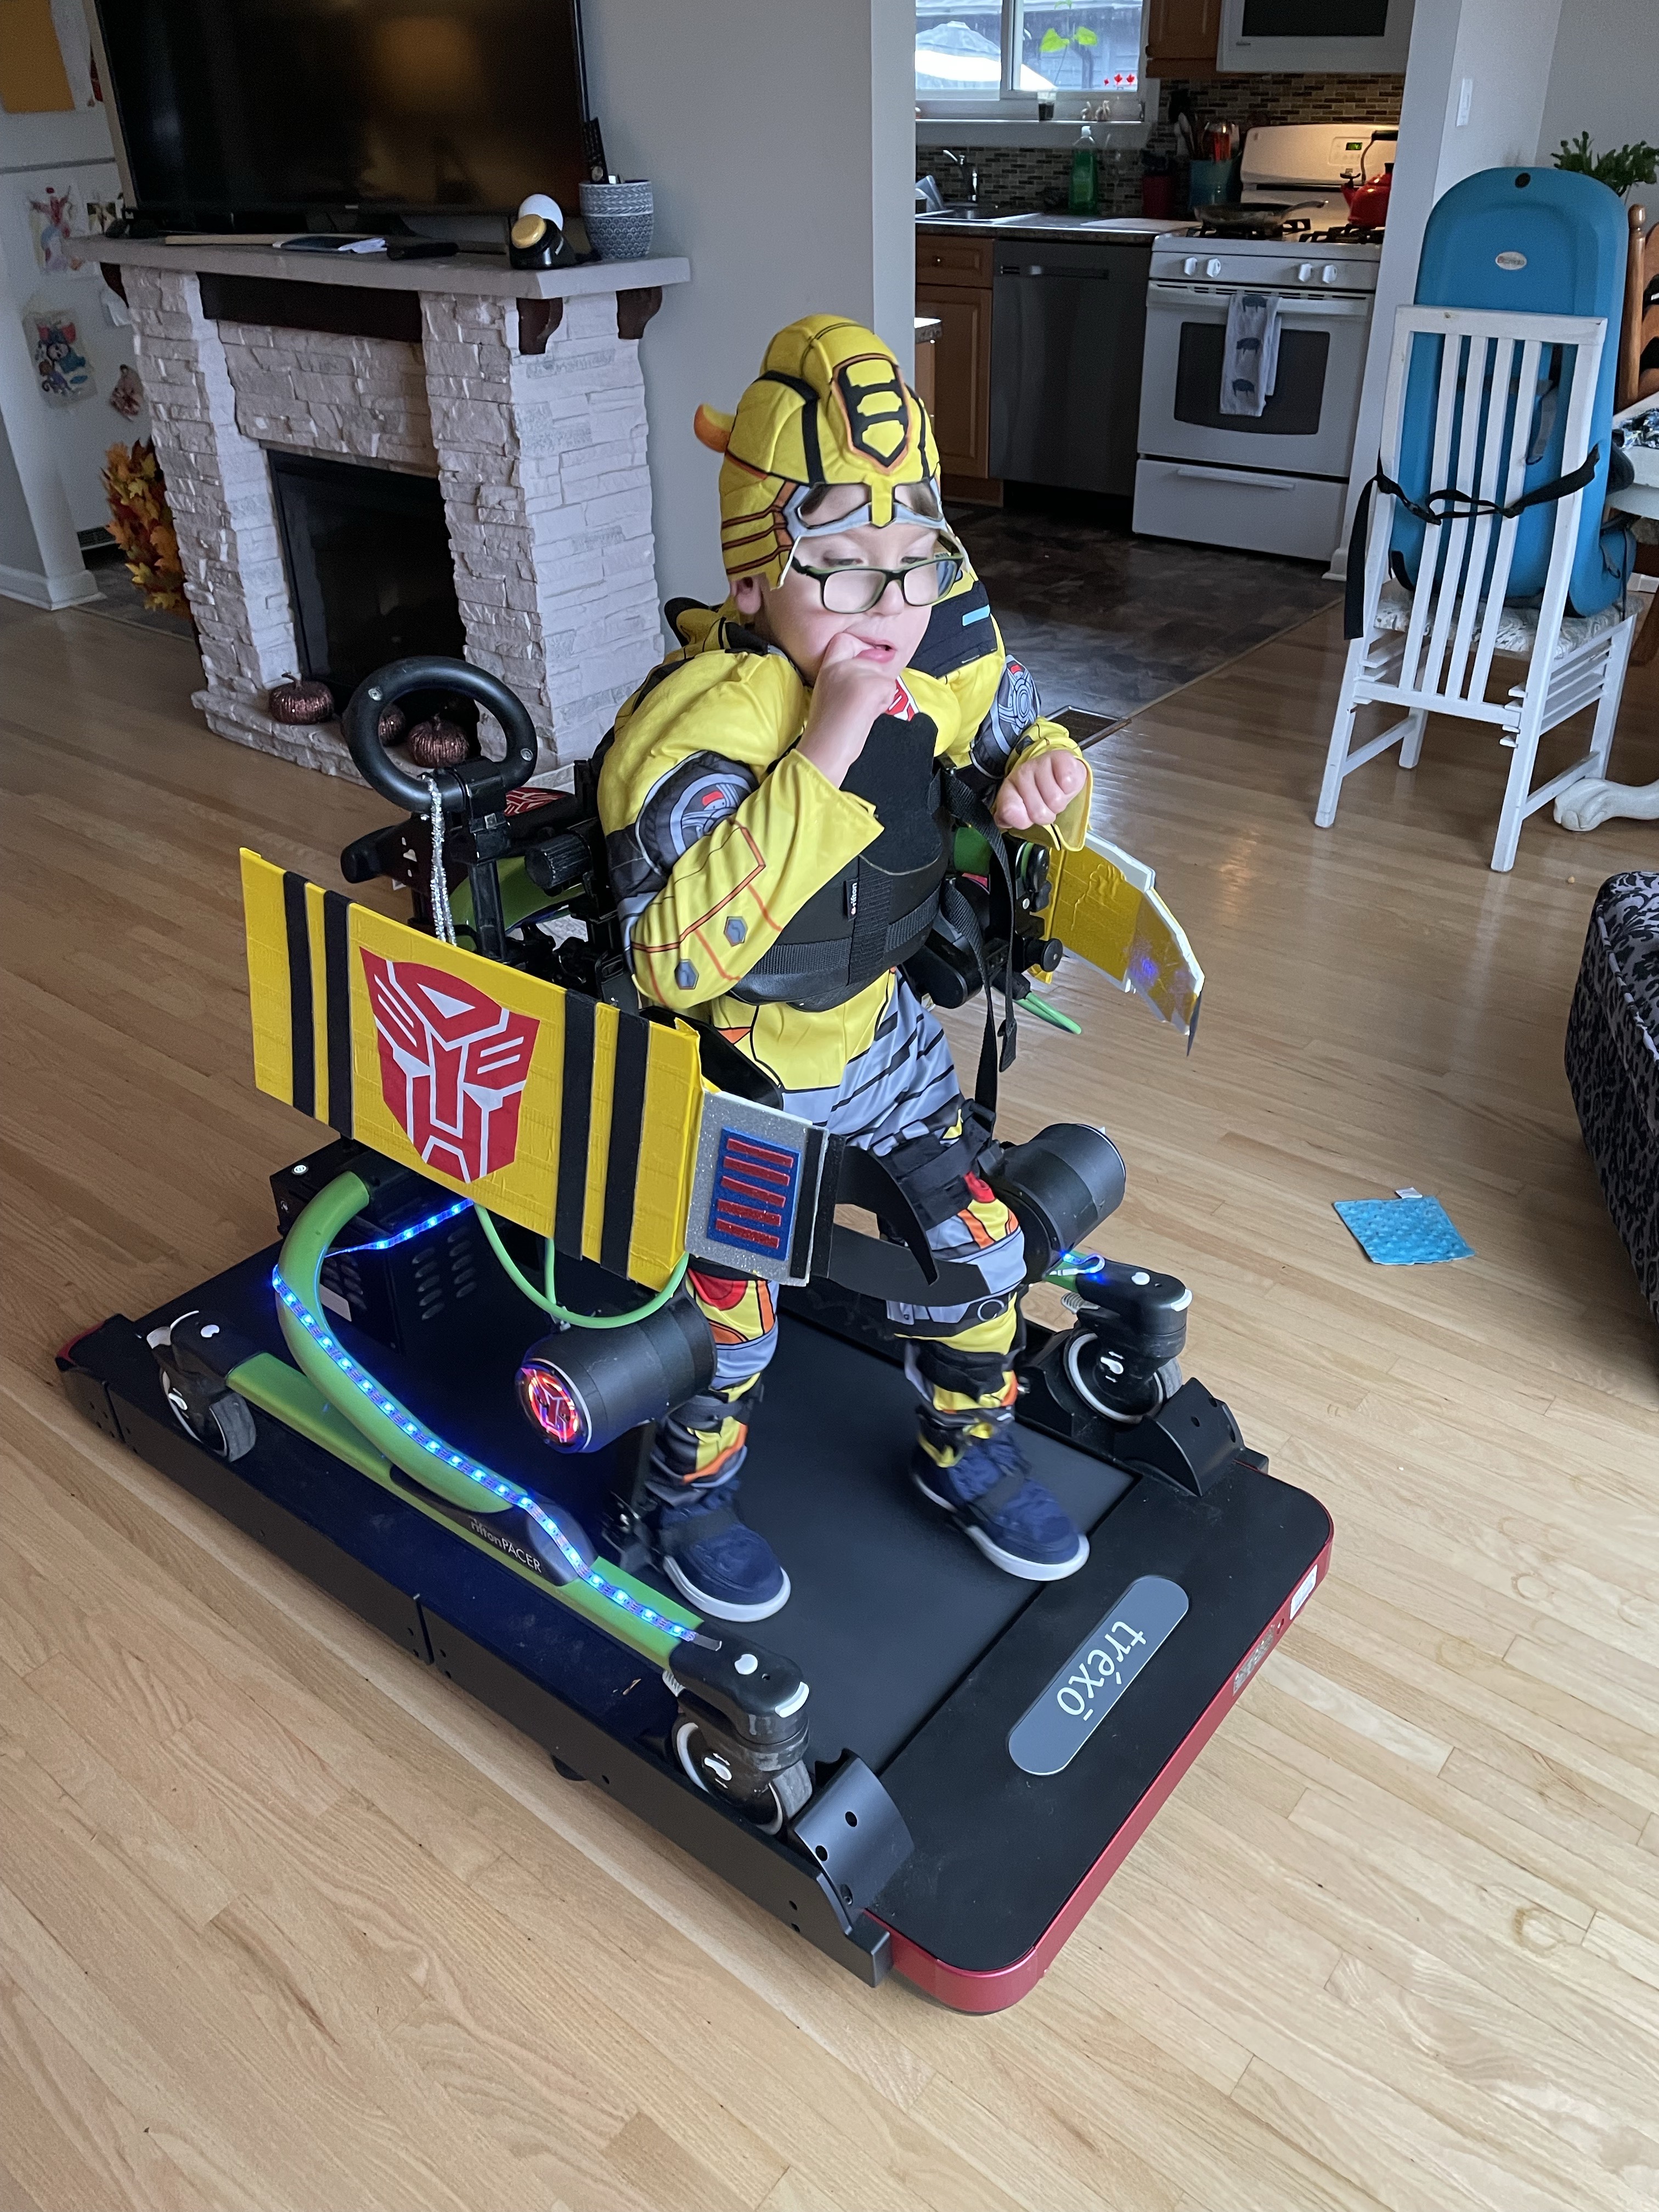 Mitch Robert - One Million Steps Celebration: Photos of Mitch and his Trexo - decked out for Halloween, ready for his Triathlon and a walk outside